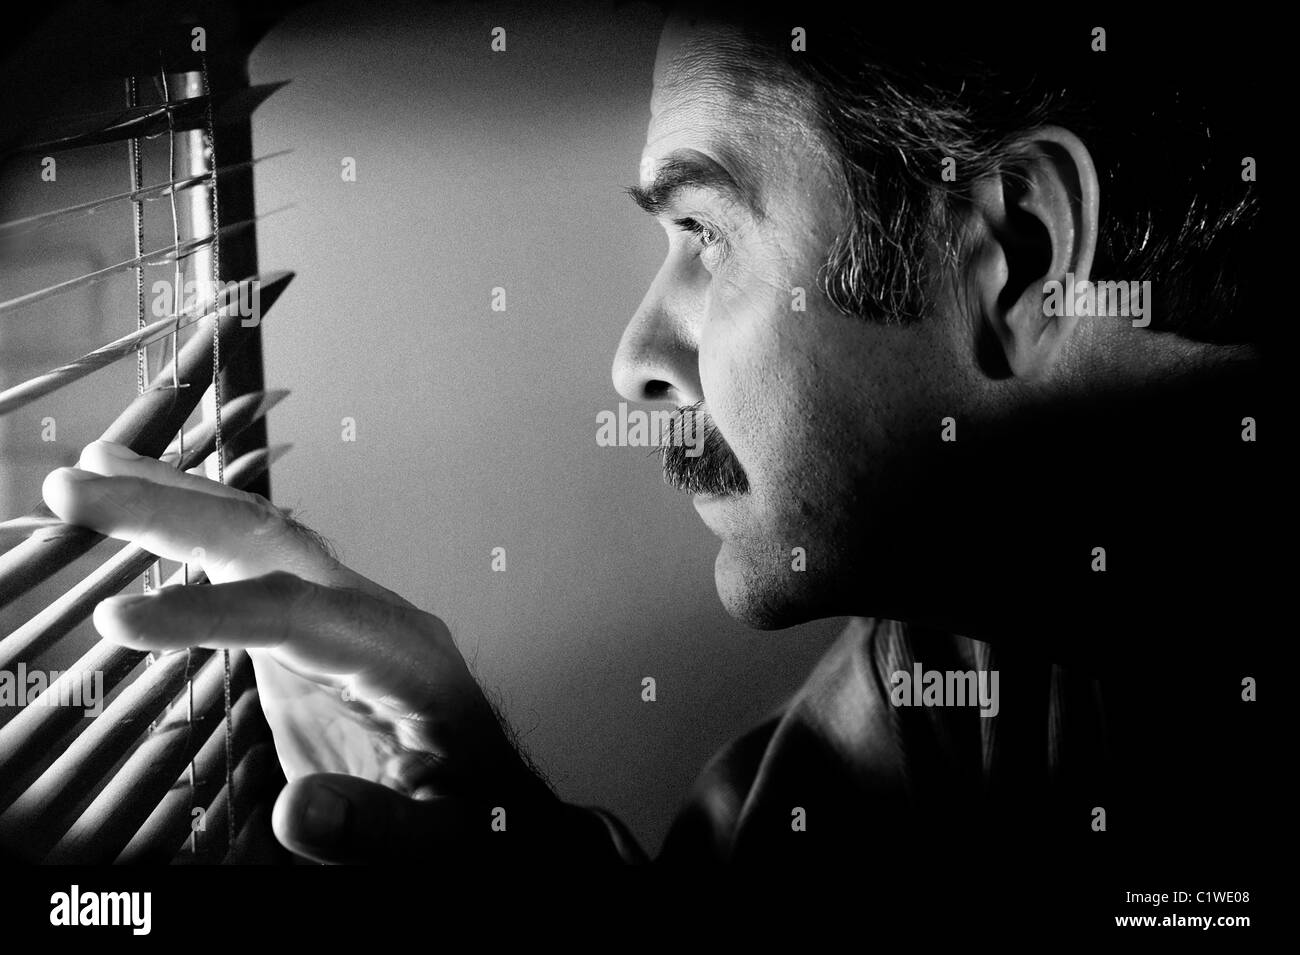 Low key concept photo of man looking furtively through window jalousie. Black&white processed image with special grained texture Stock Photo